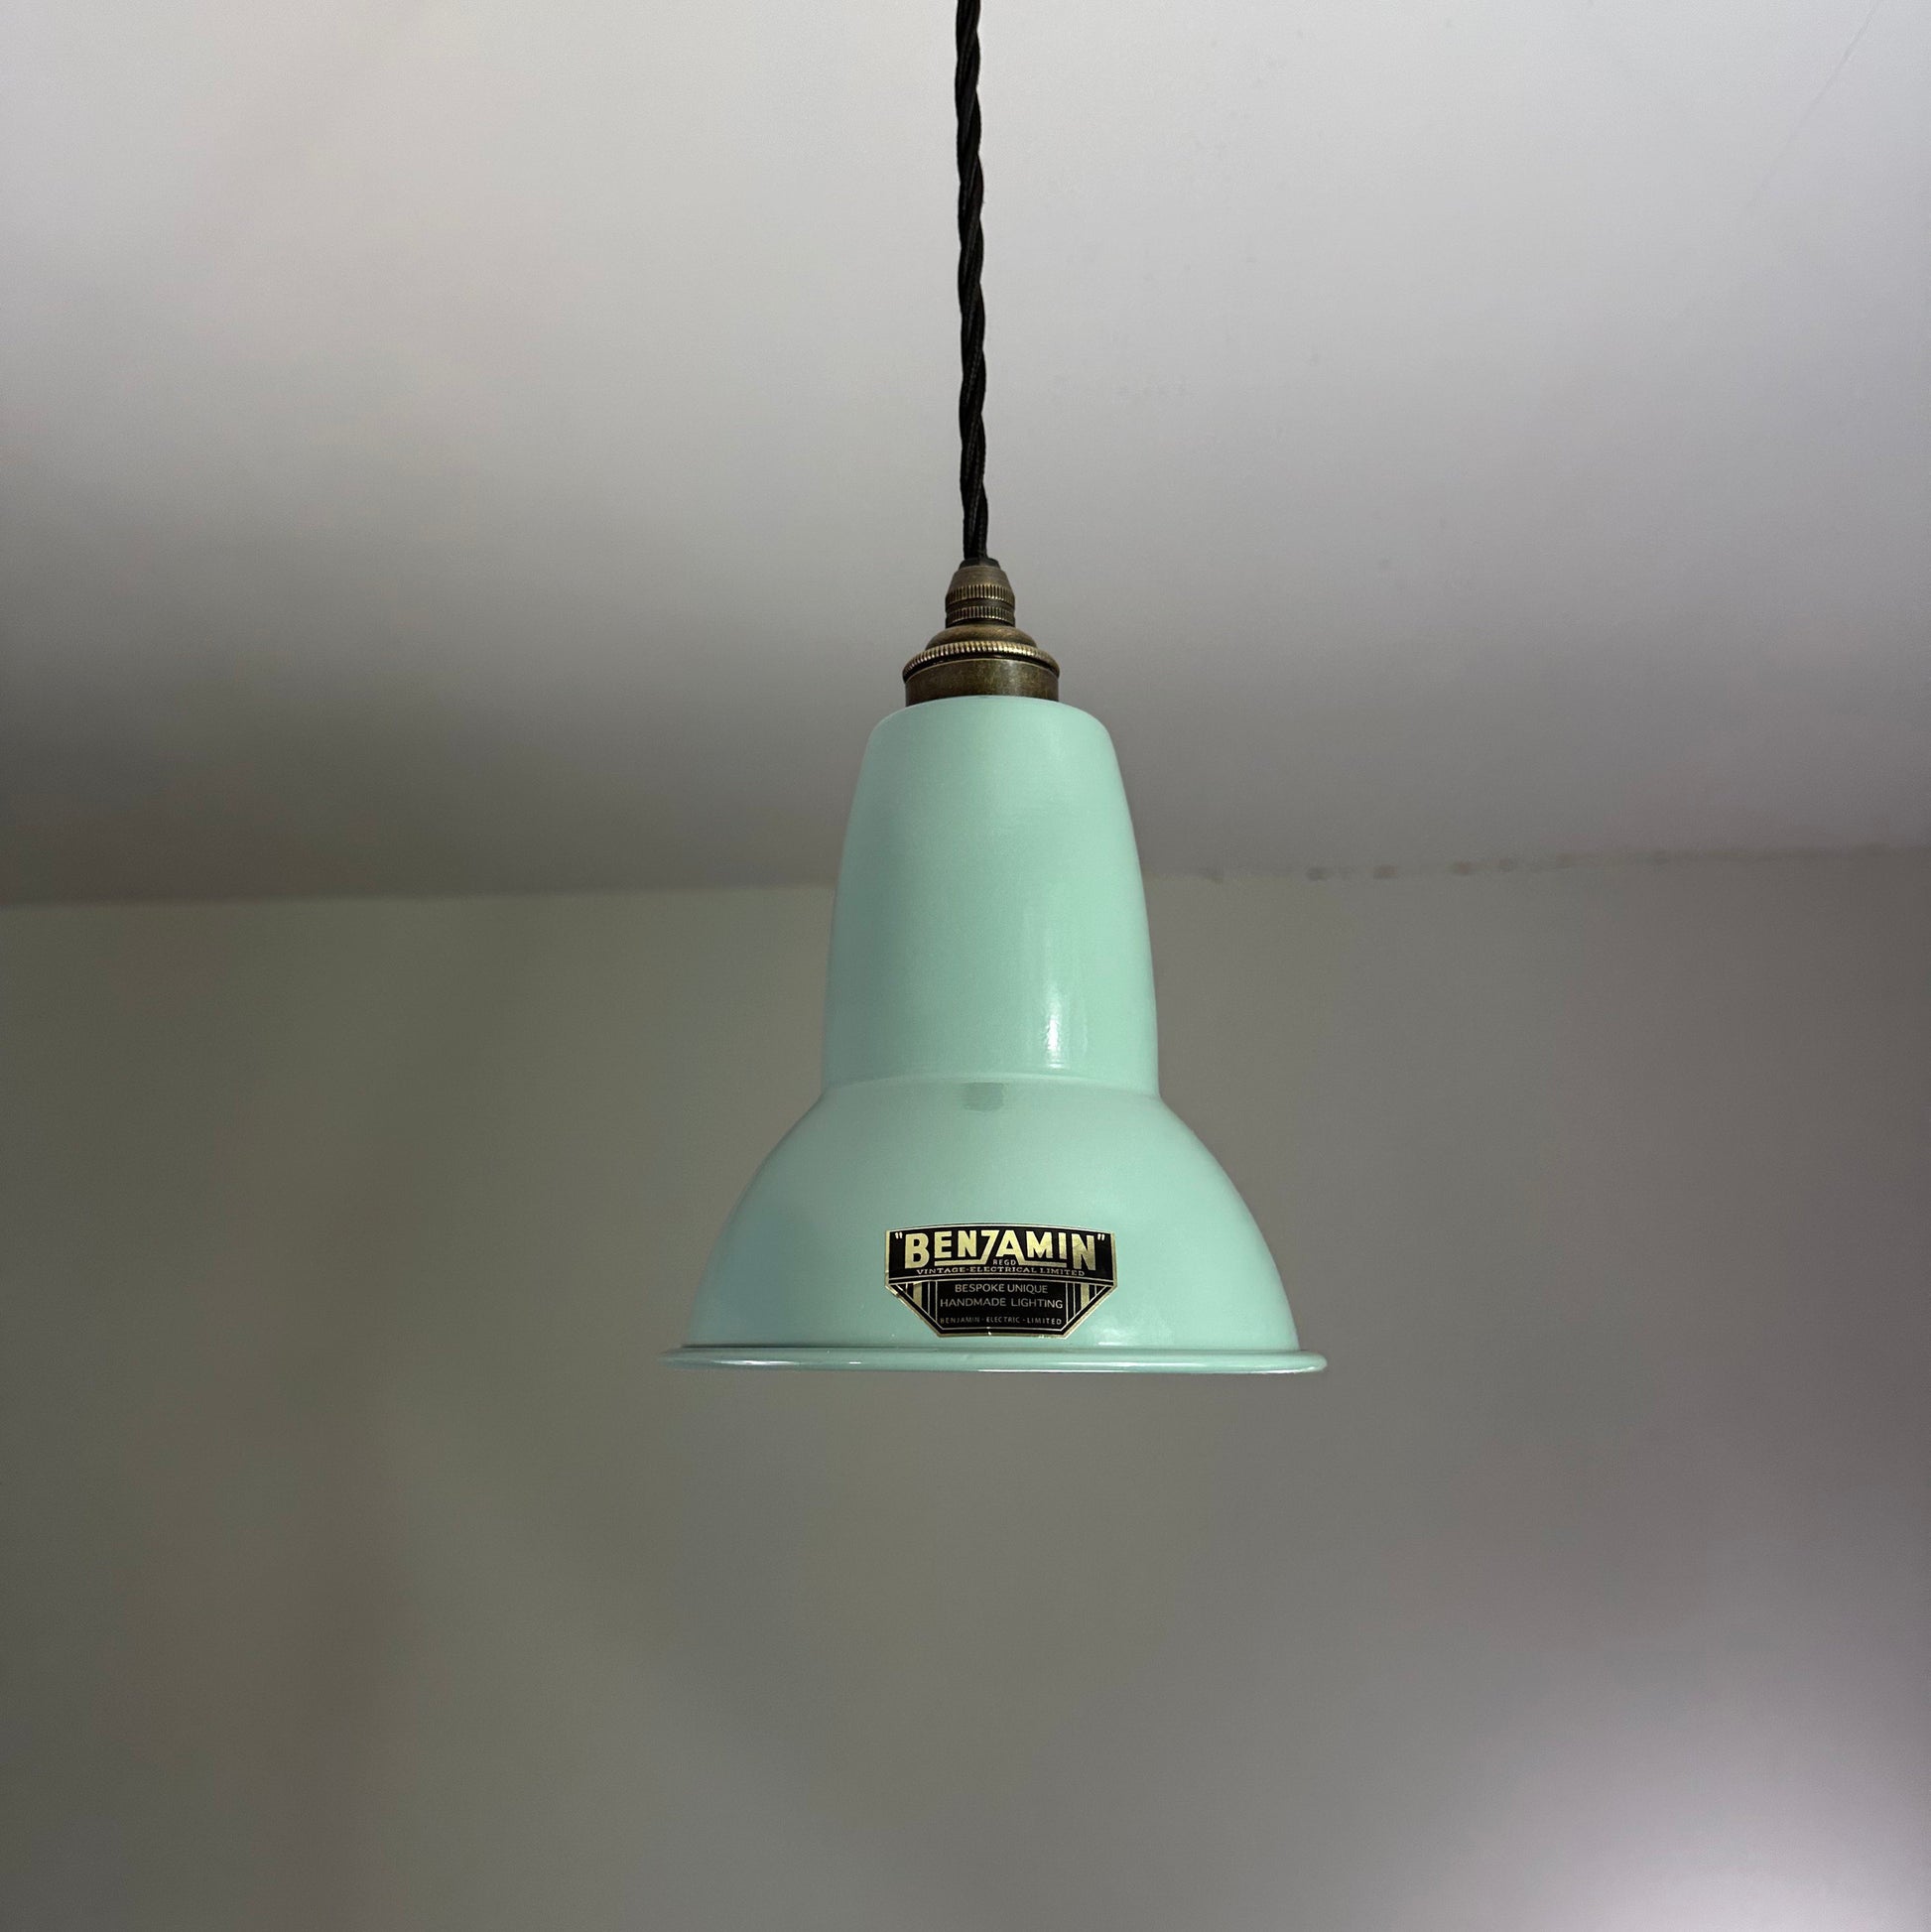 Alby ~ Pistachio Green Shade Pendant Set Light | Ceiling Dining Room | Kitchen Table | Vintage Edison Filament Bulb | 6 Inch